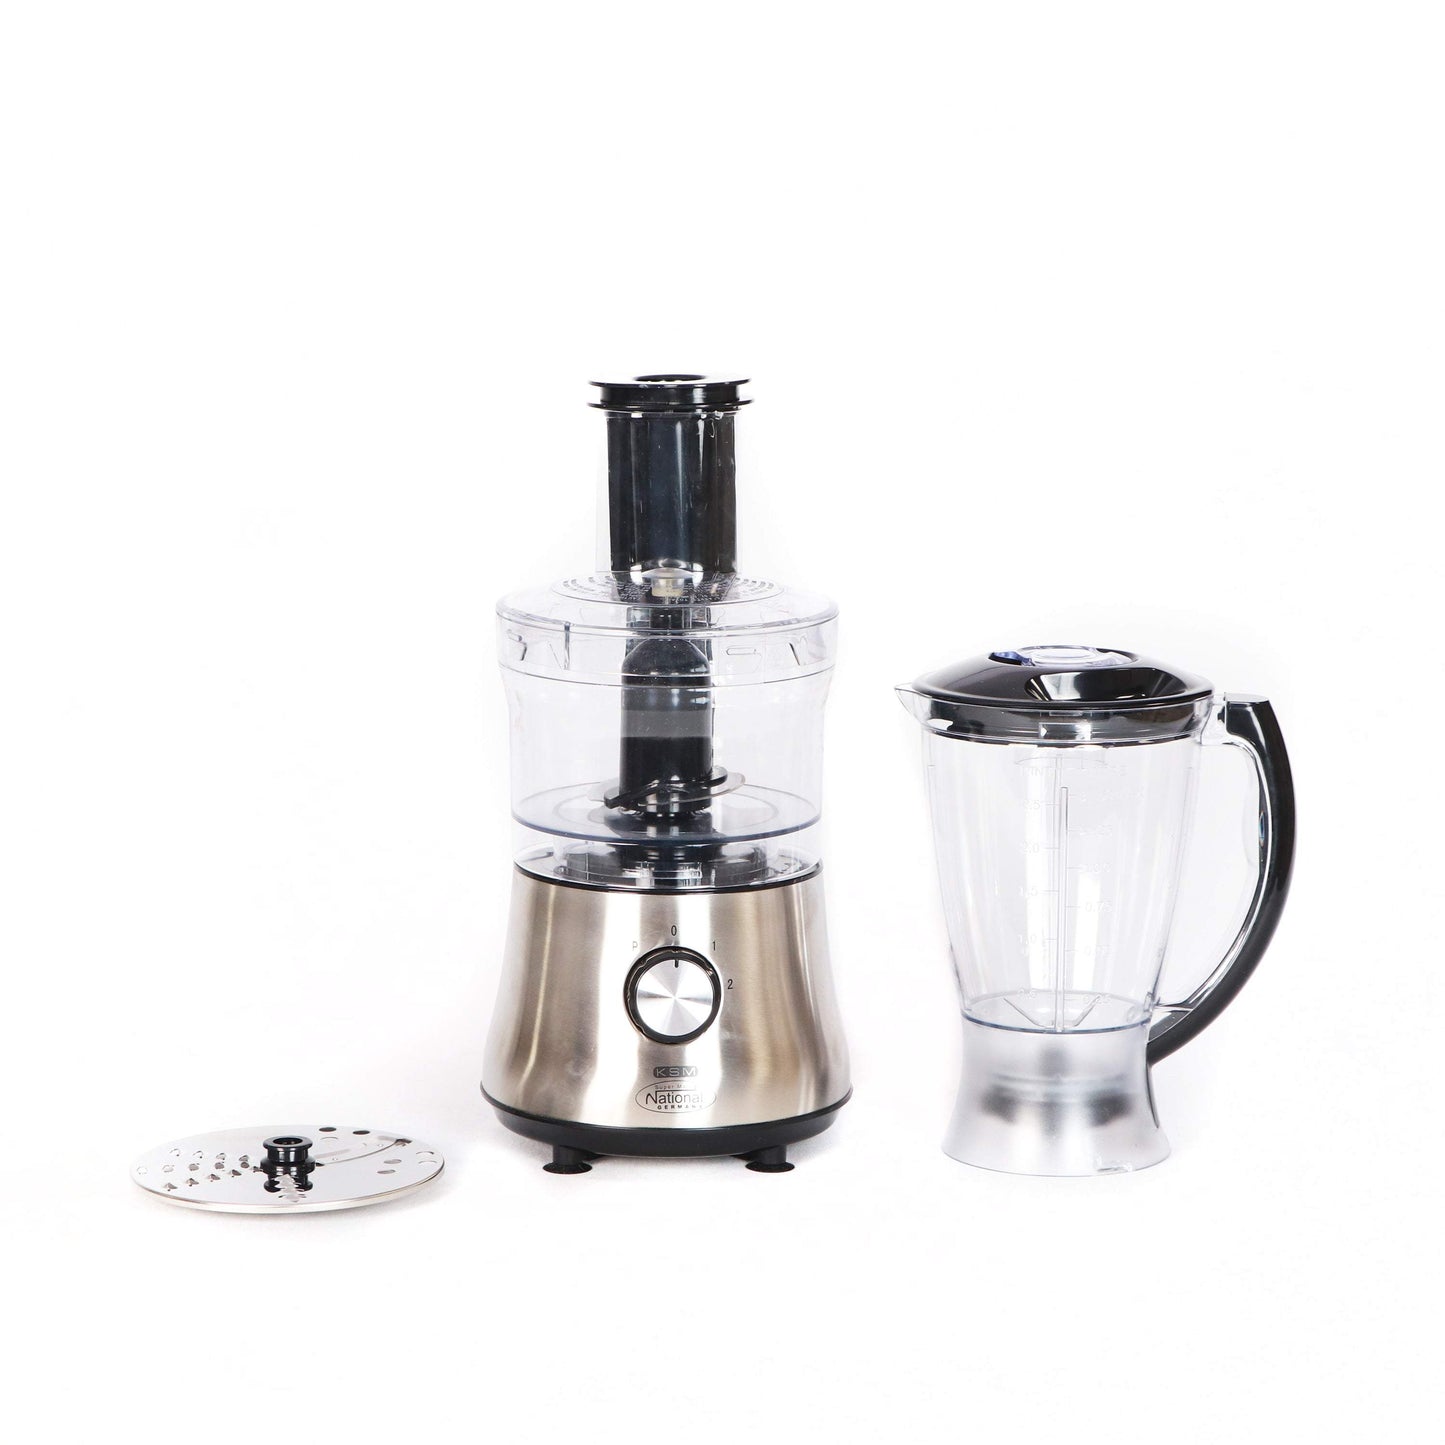 KSM Food processor made in Germany-Royal Brands Co-